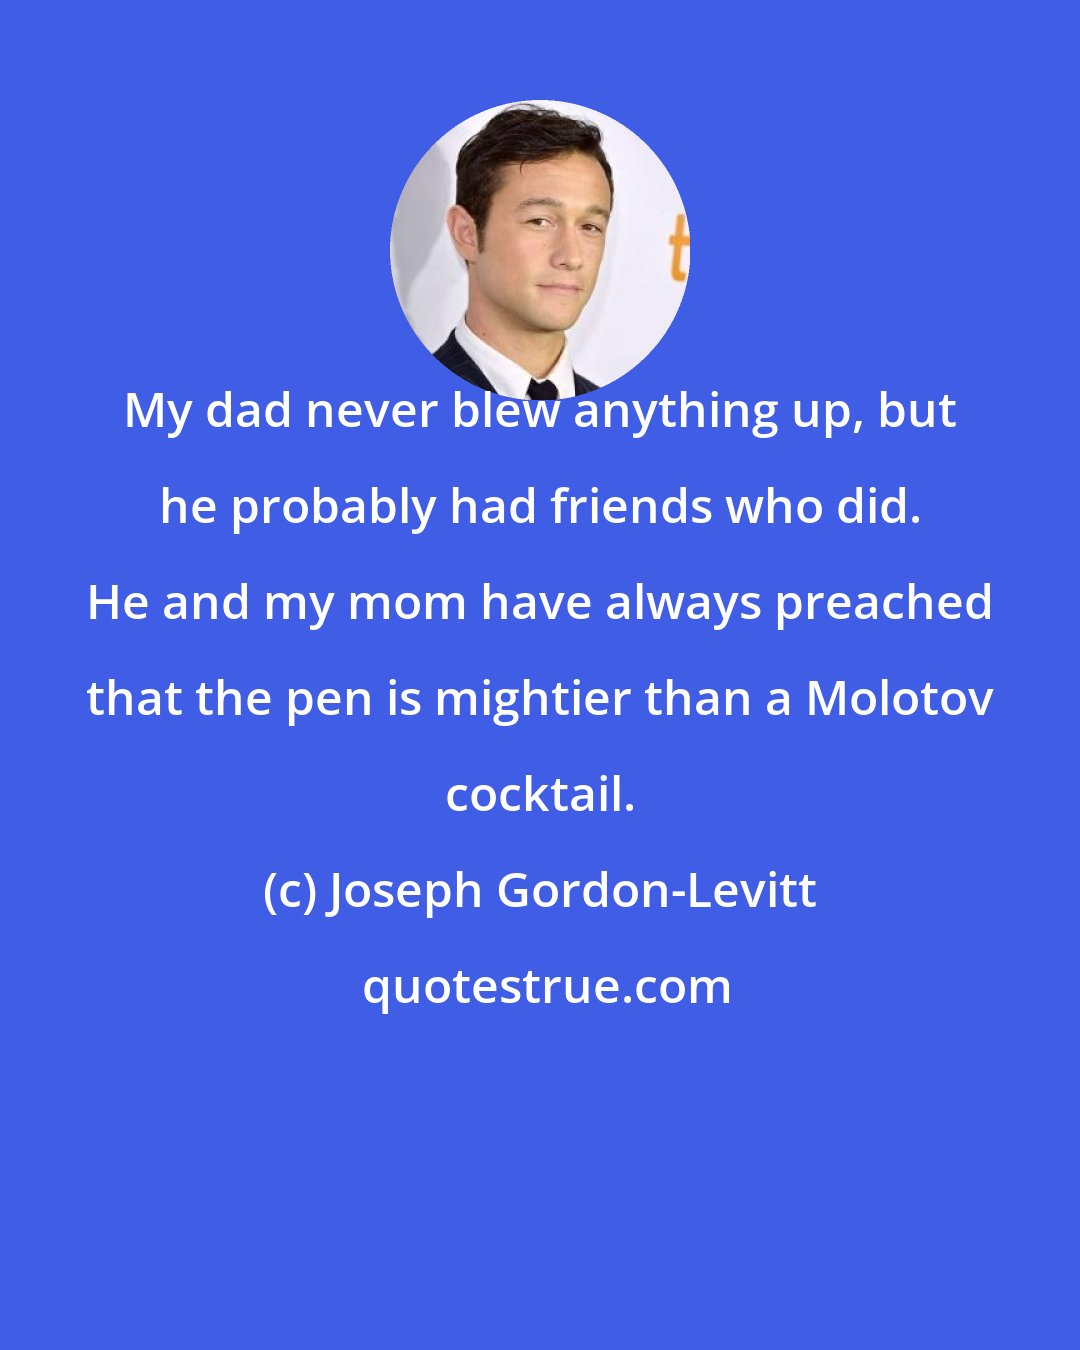 Joseph Gordon-Levitt: My dad never blew anything up, but he probably had friends who did. He and my mom have always preached that the pen is mightier than a Molotov cocktail.